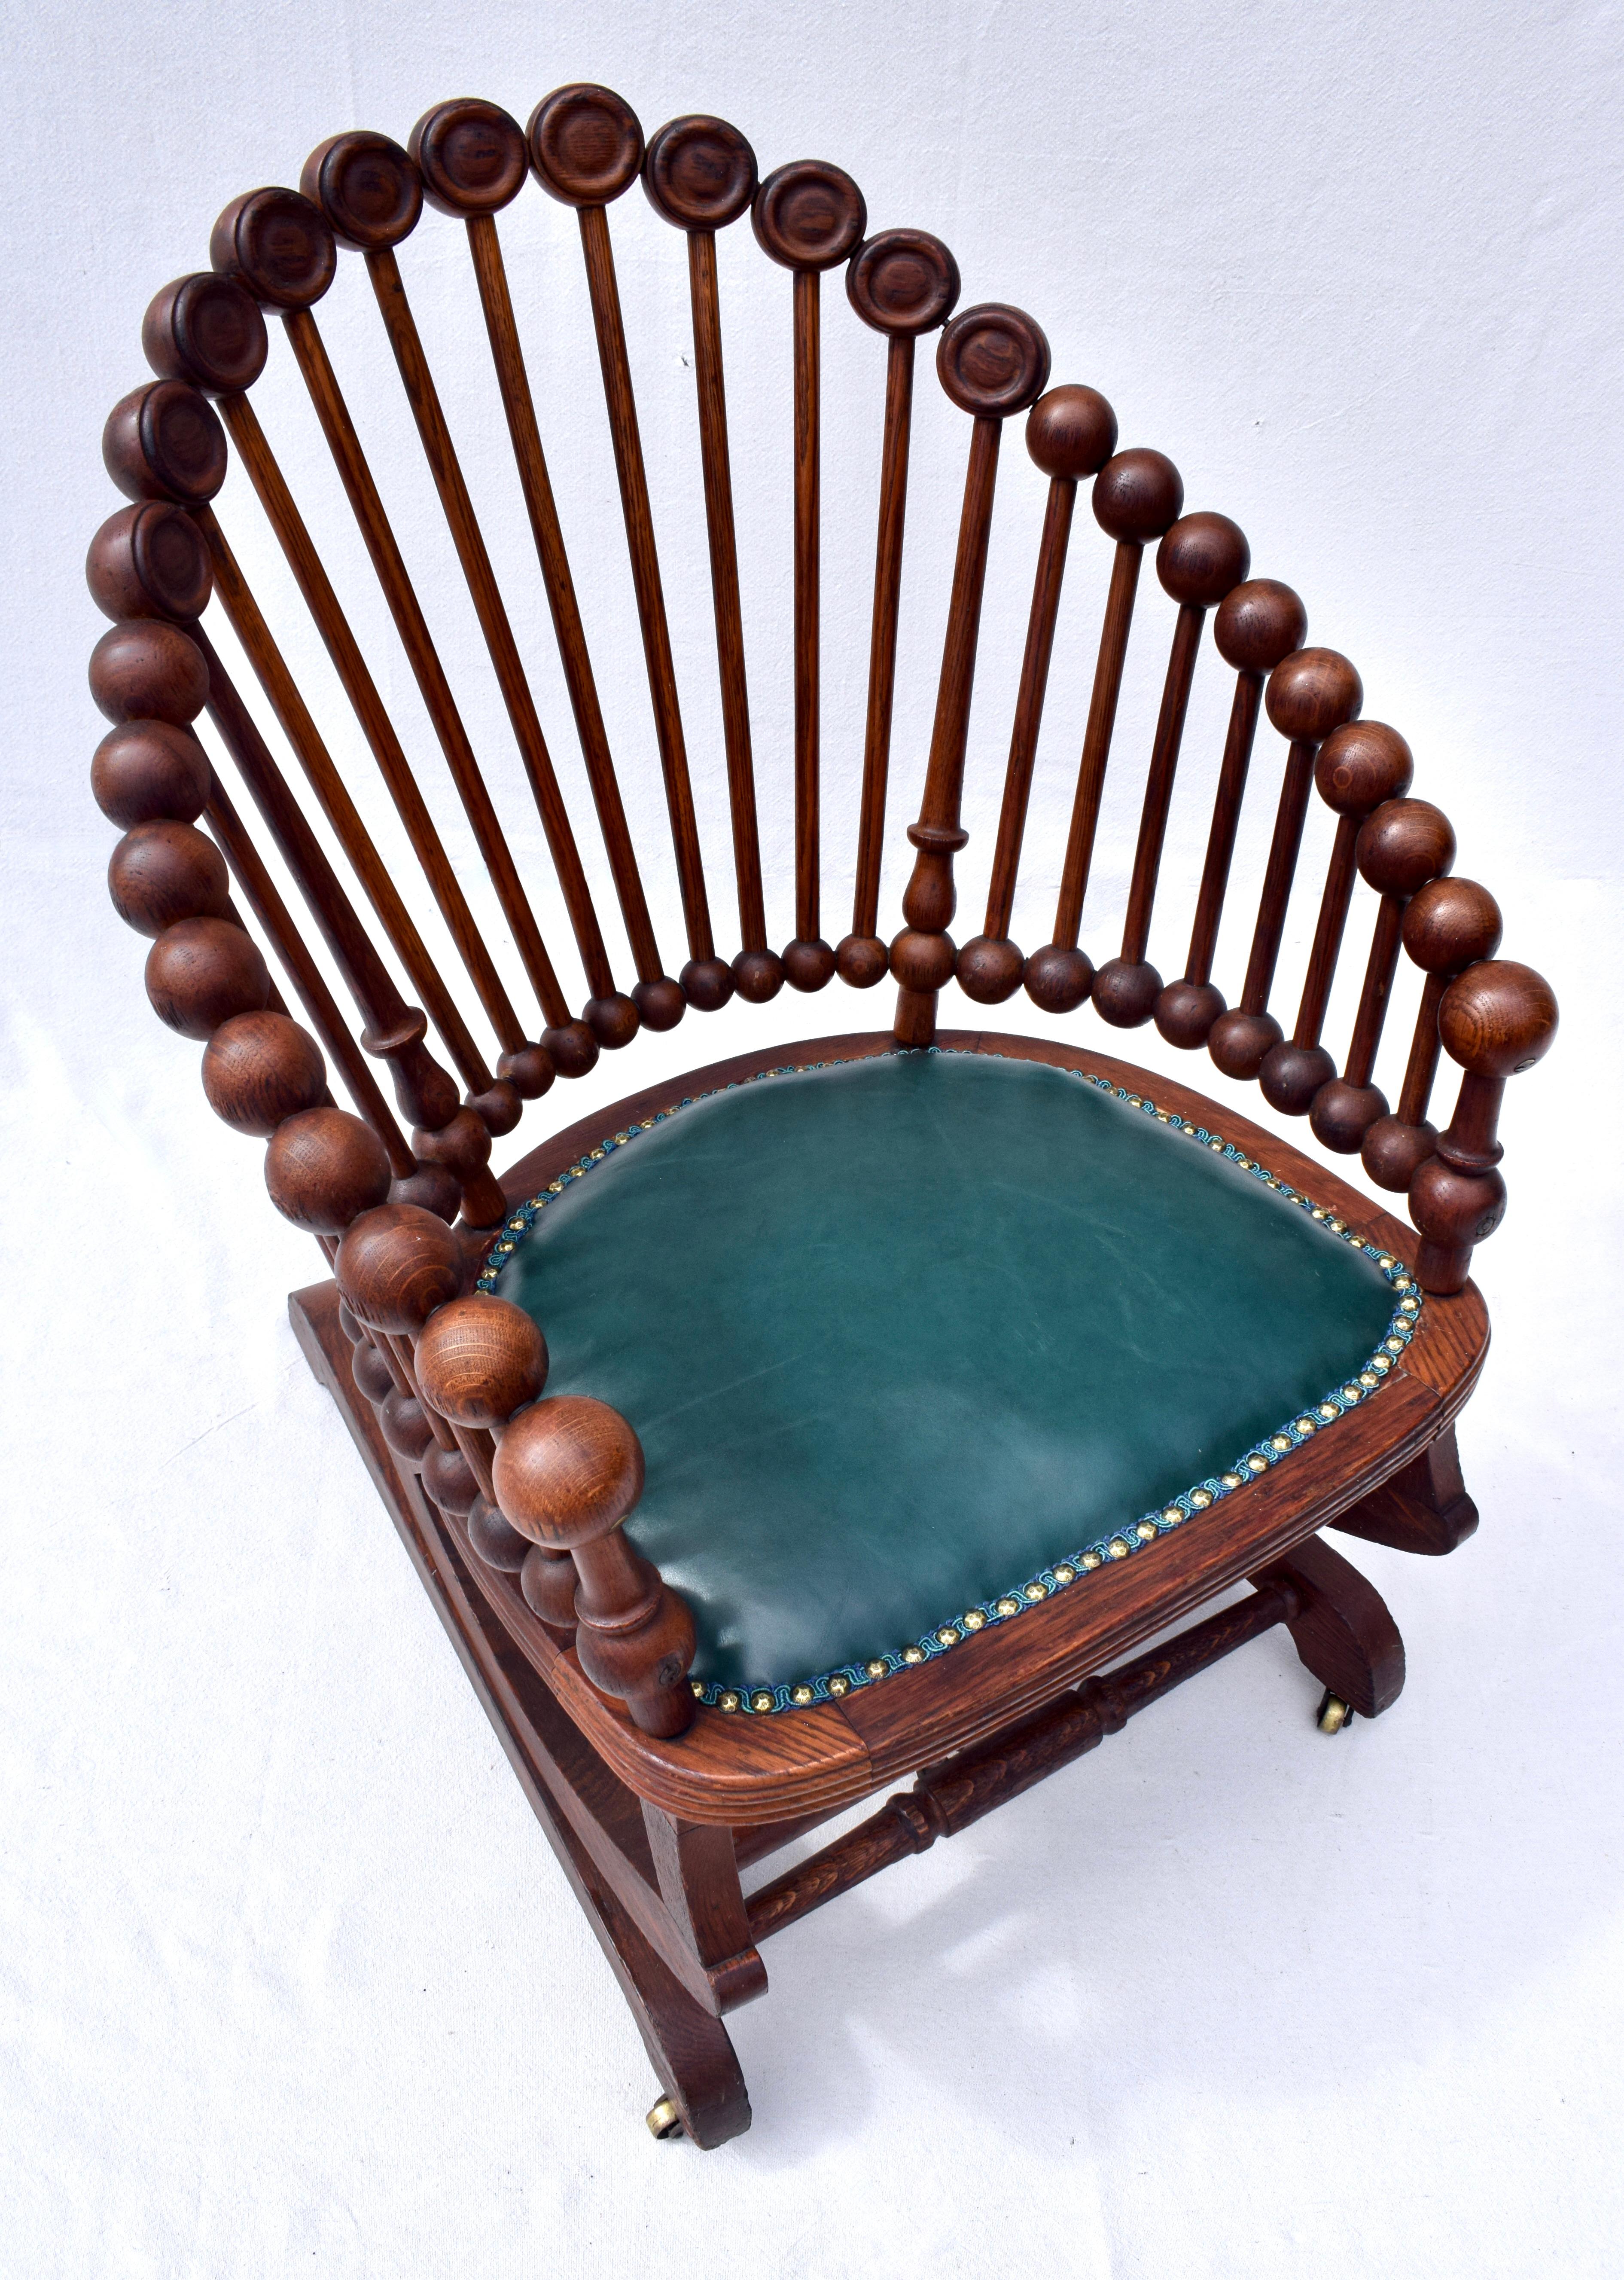 An outstanding Lollipop platform rocker in carved Oak by George Hunzinger late 19th c. production. The iconic patented Huntzinger steel and spring rocking mechanism is perfectly in tact as well as the original padding in the seat, newly recovered in